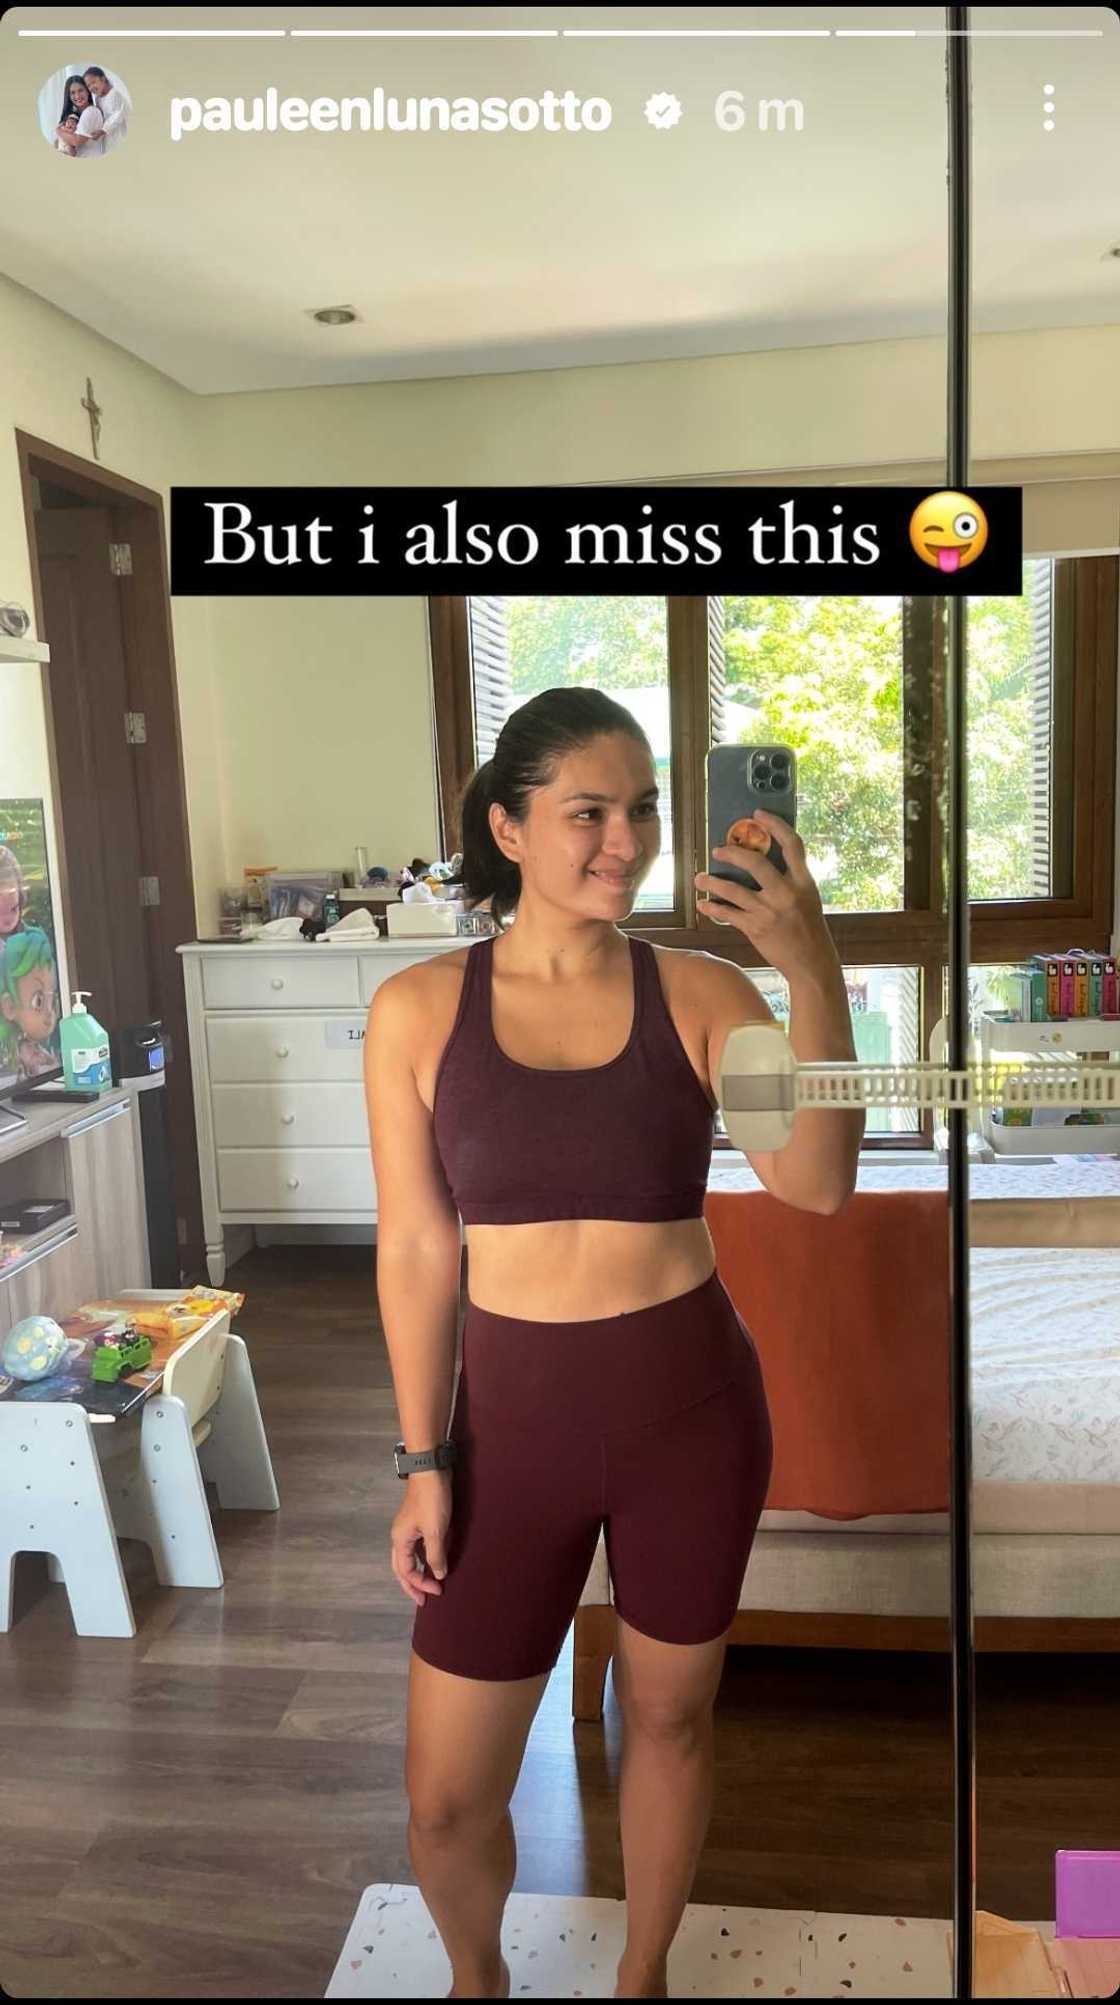 Pauleen Luna shares snaps showing her previous body shapes she misses